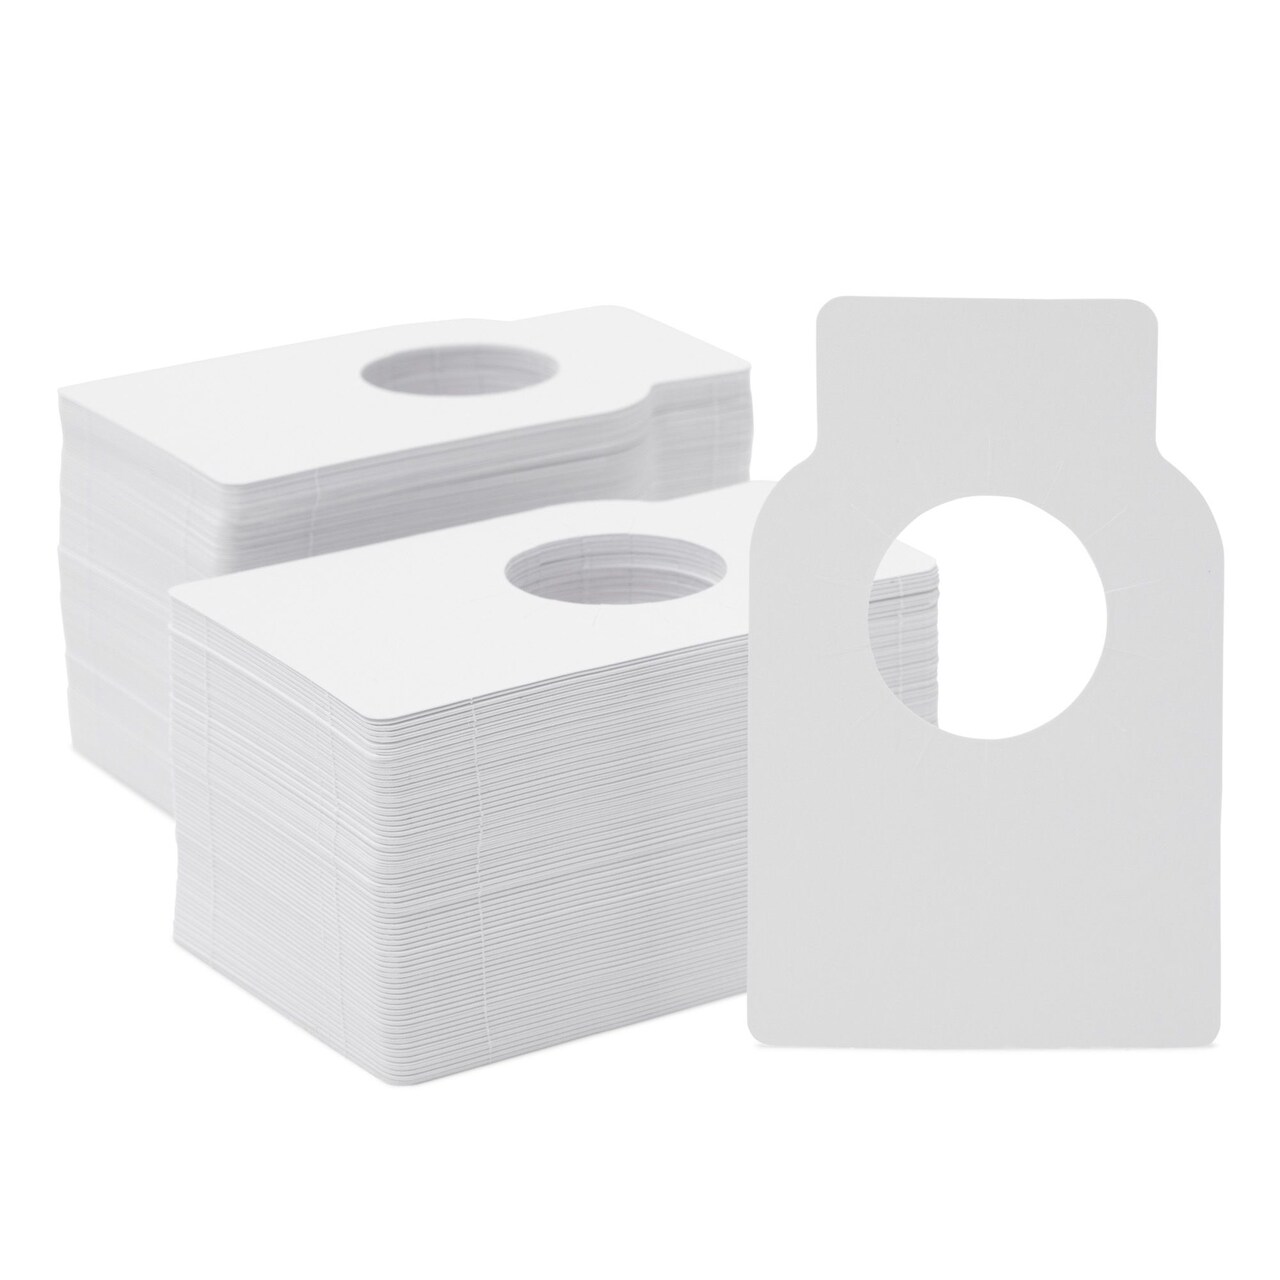 Juvale Blank Wine Bottle Tags, Cellar Labels for Organization (White, 300 Pack)